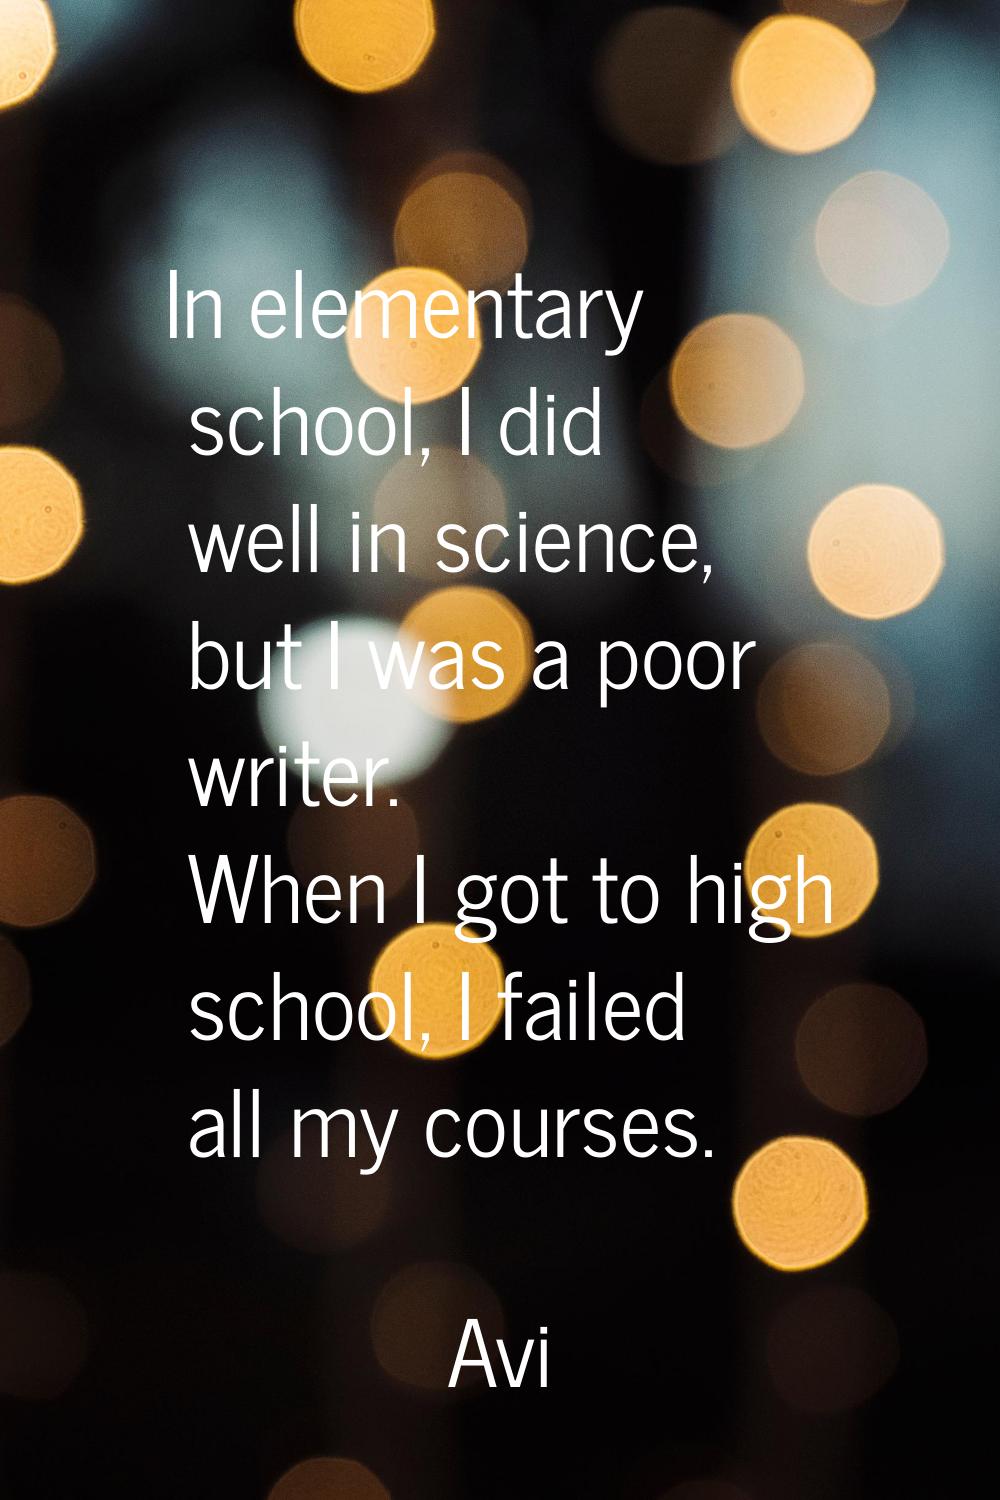 In elementary school, I did well in science, but I was a poor writer. When I got to high school, I 